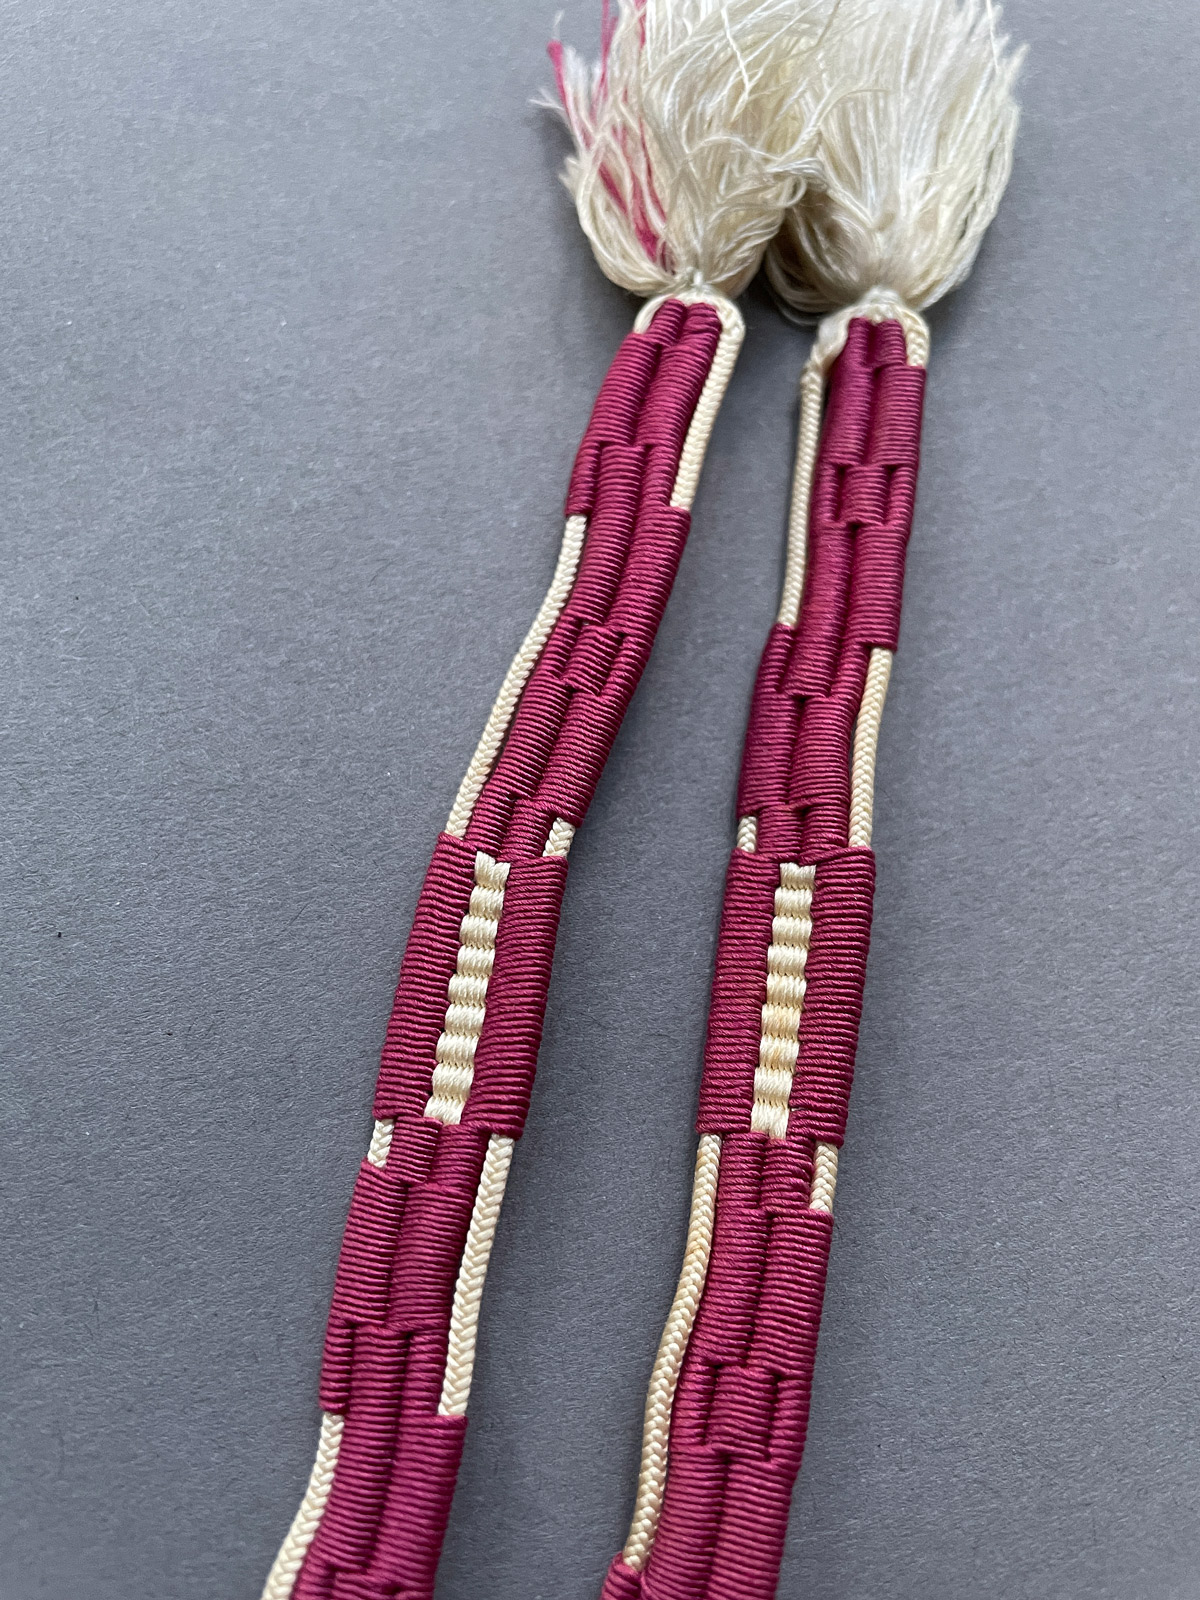 Refined woven silk obijime cord in wine red and beige